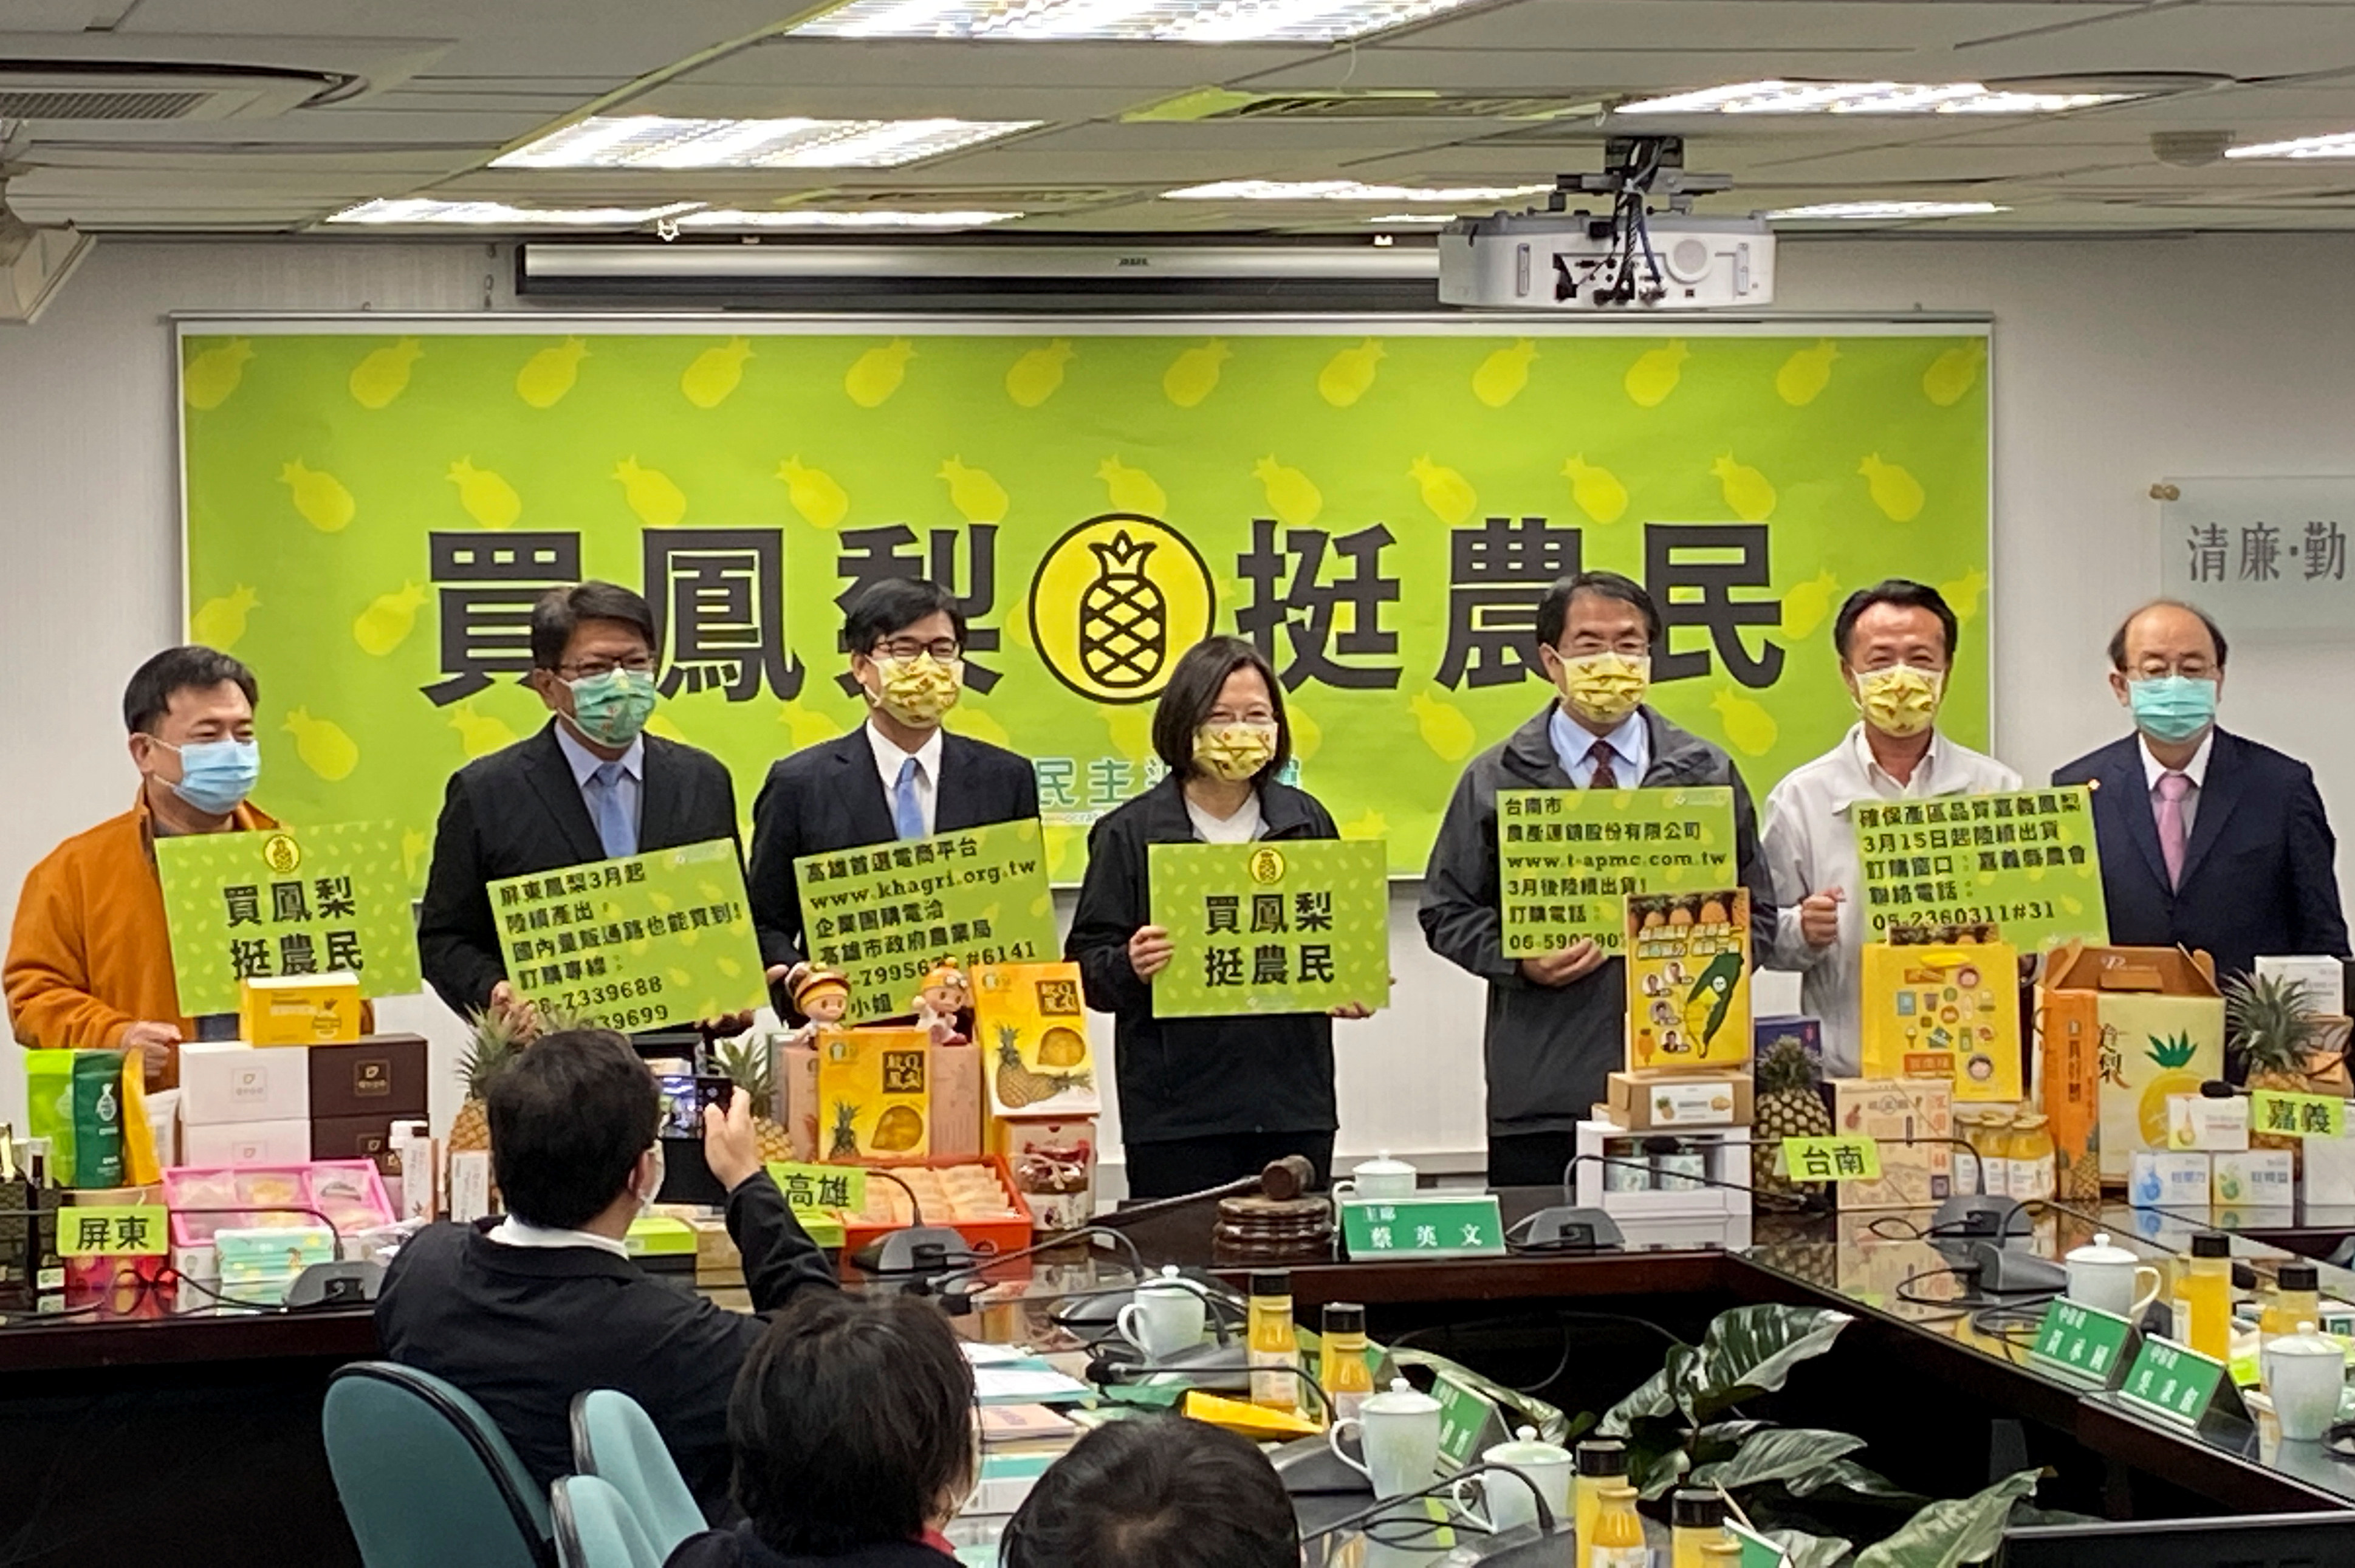 Taiwan President Tsai Ing-wen attends an event promoting Taiwanese pineapples in Taipei